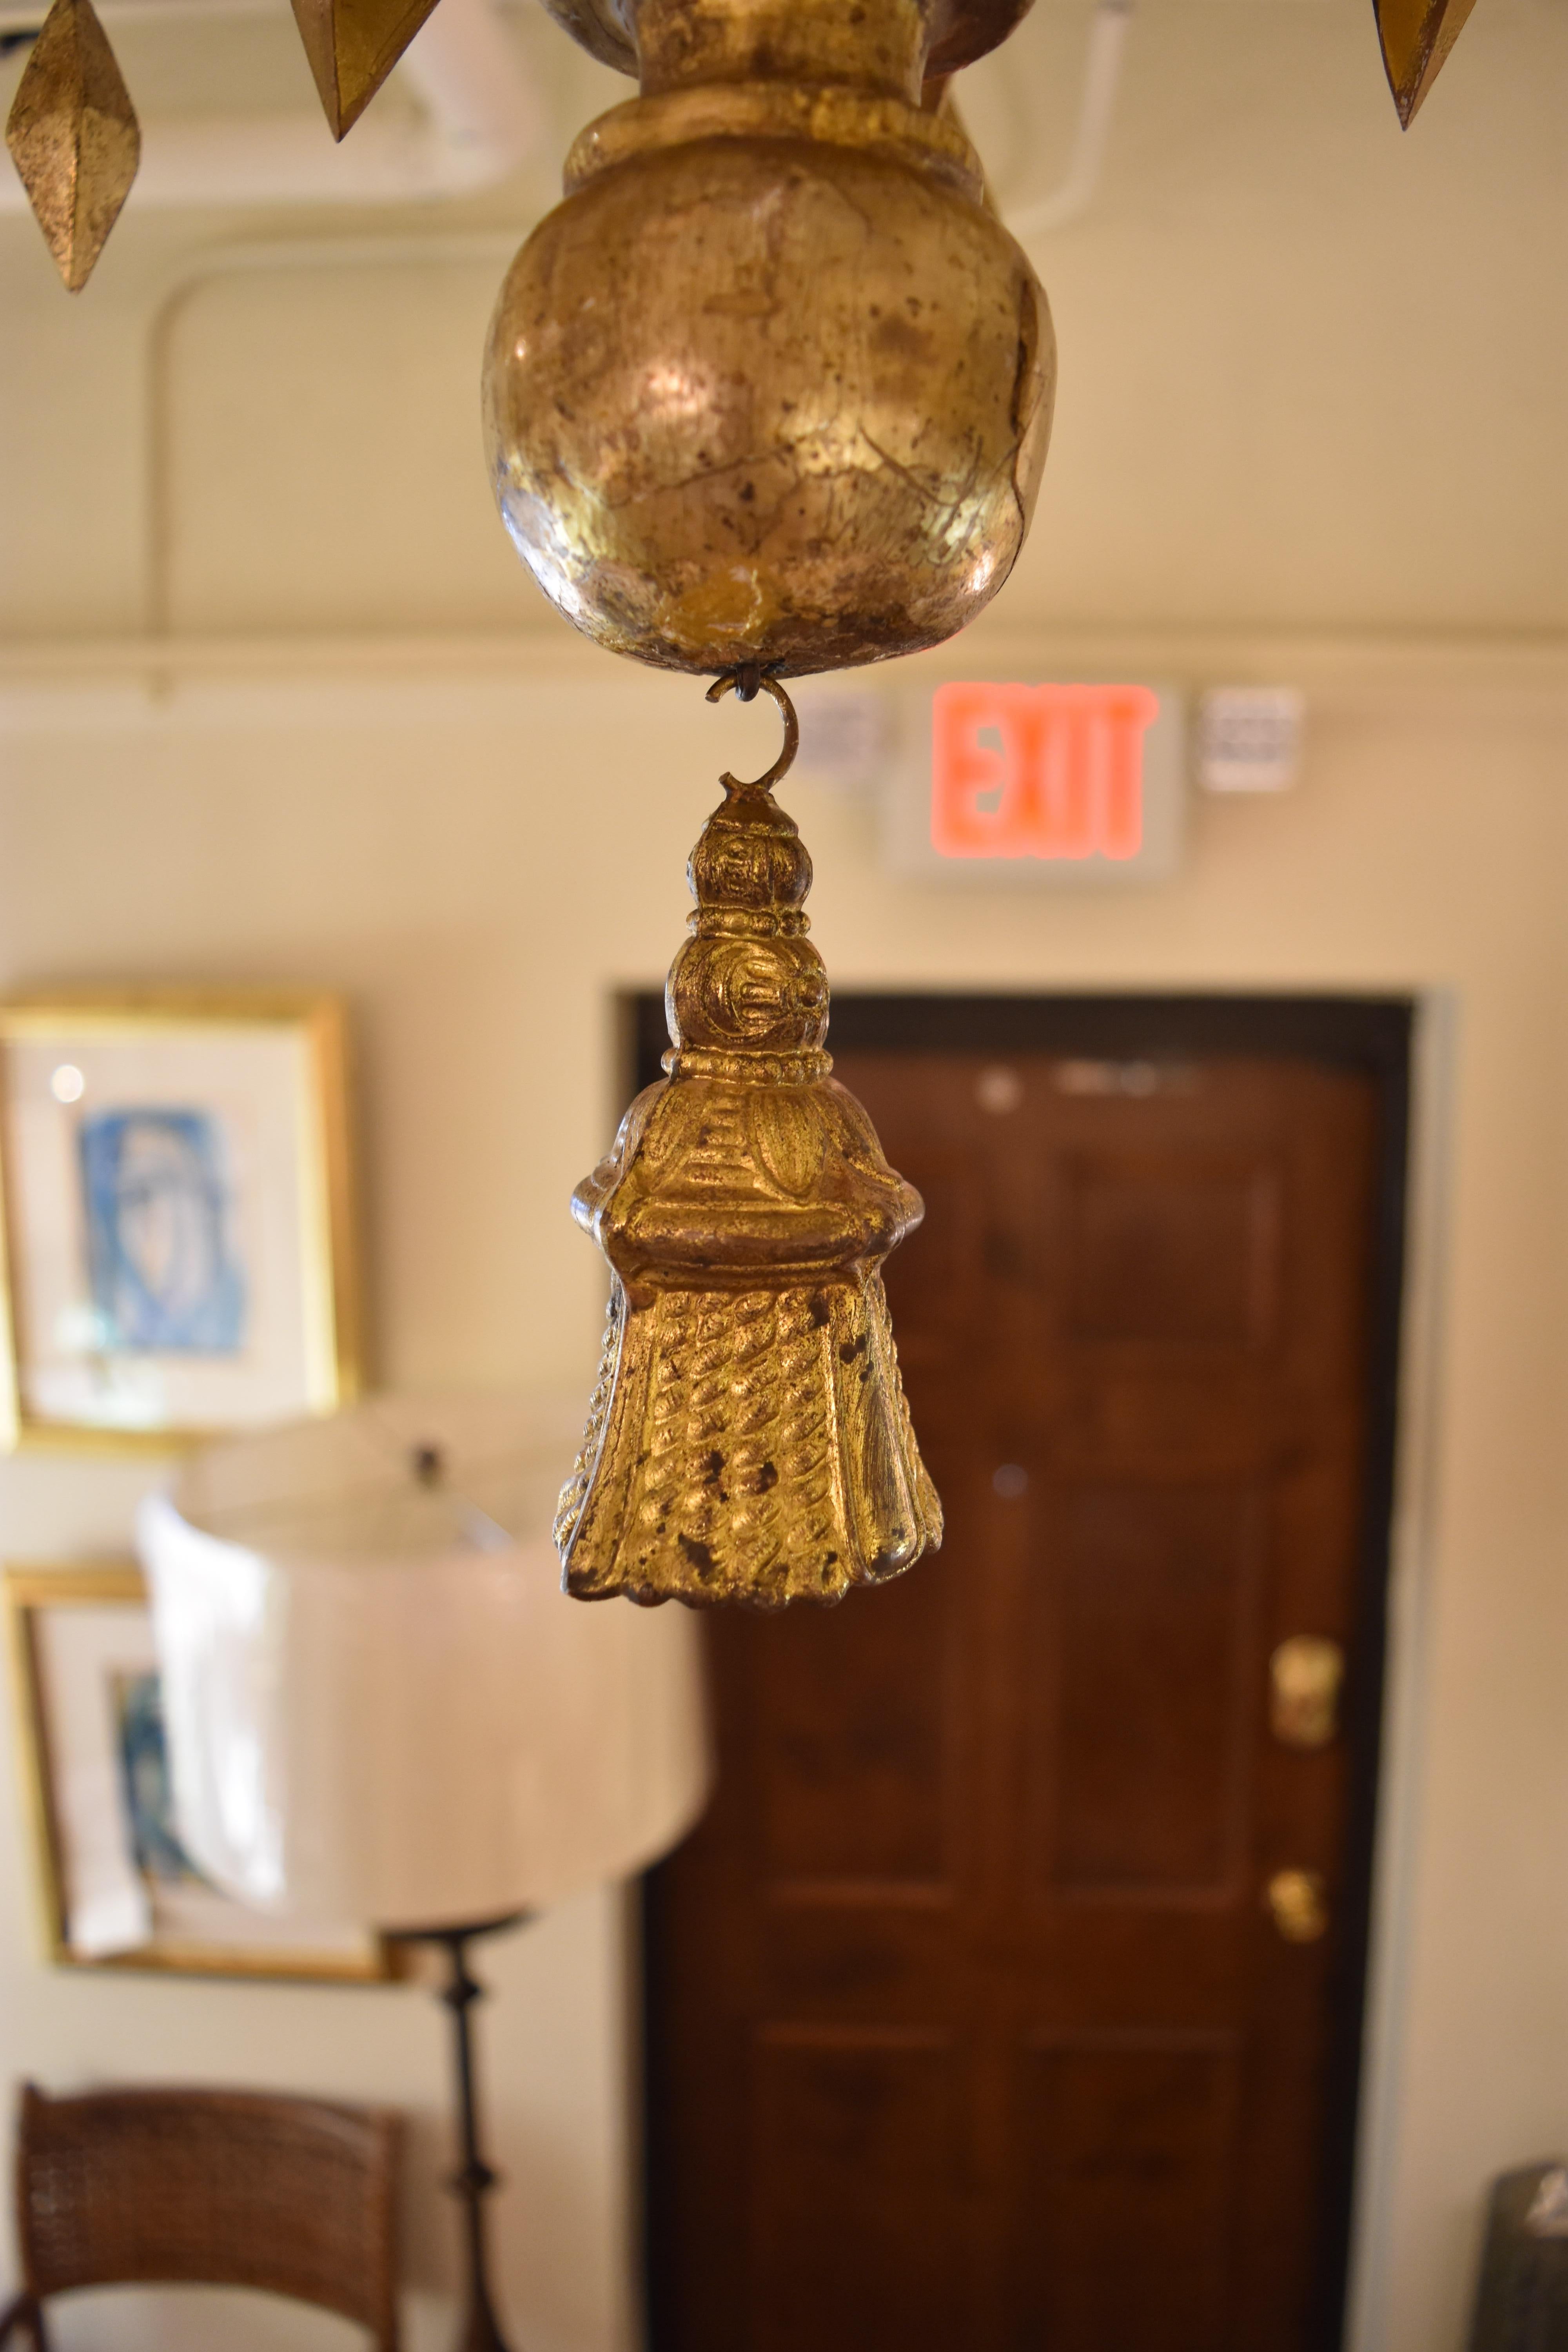 This unique 19th century Italian giltwood chandelier features a transitional geometric design with five scrolling arms with diamond shaped prisms embellishing each arm. The finish is a bright gold with some minor chipping. There is also a decorative